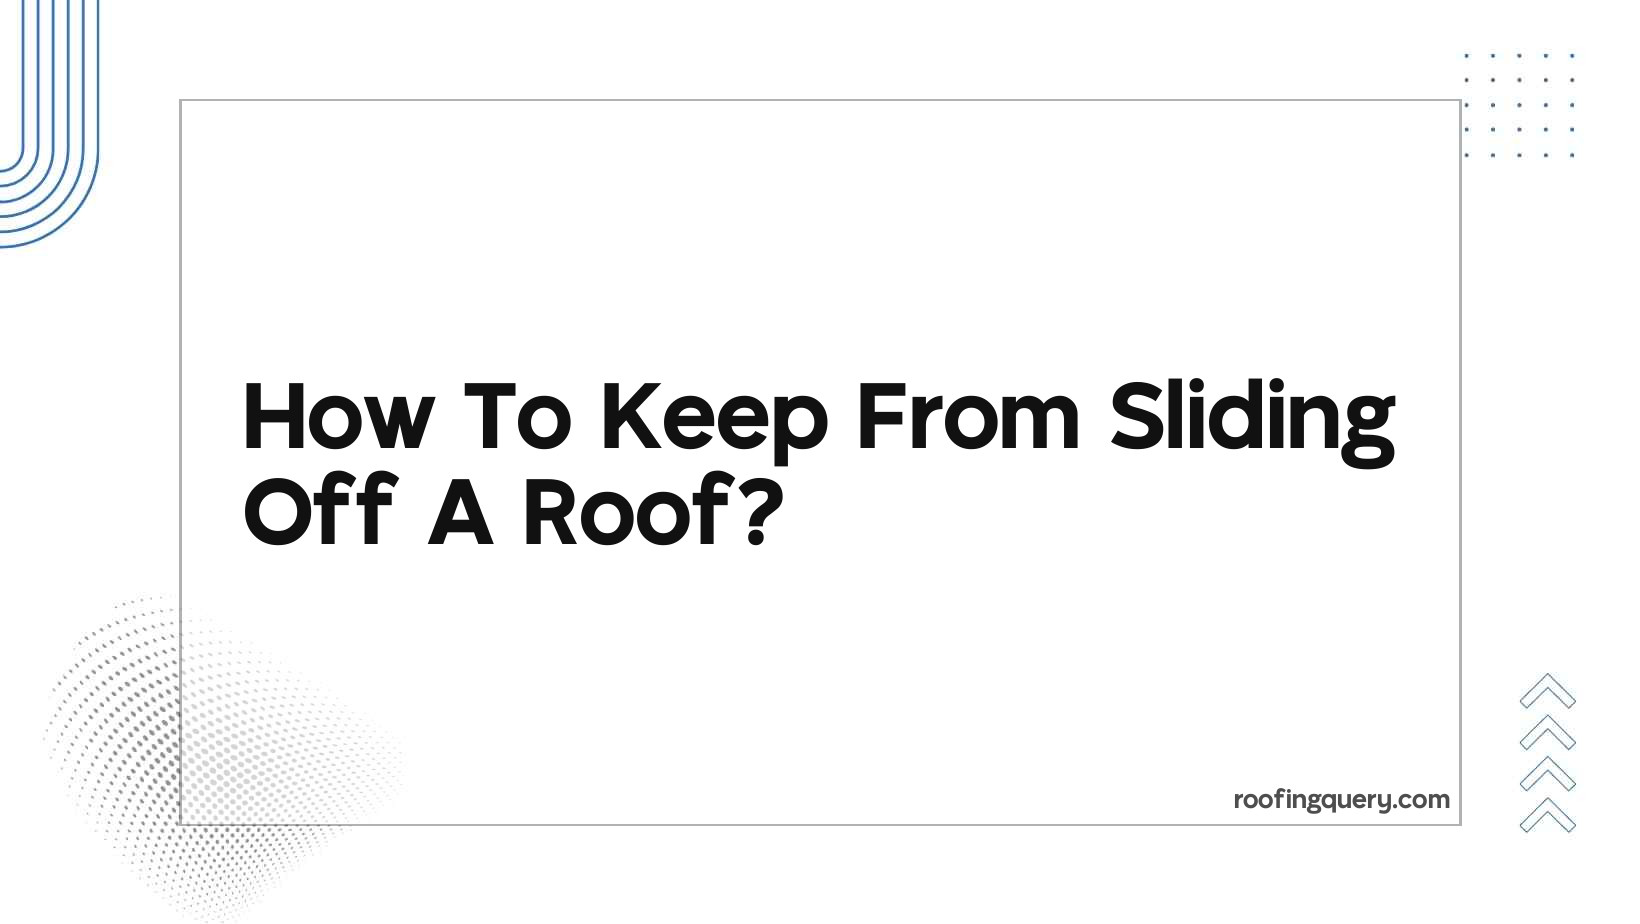 How To Keep From Sliding Off A Roof?